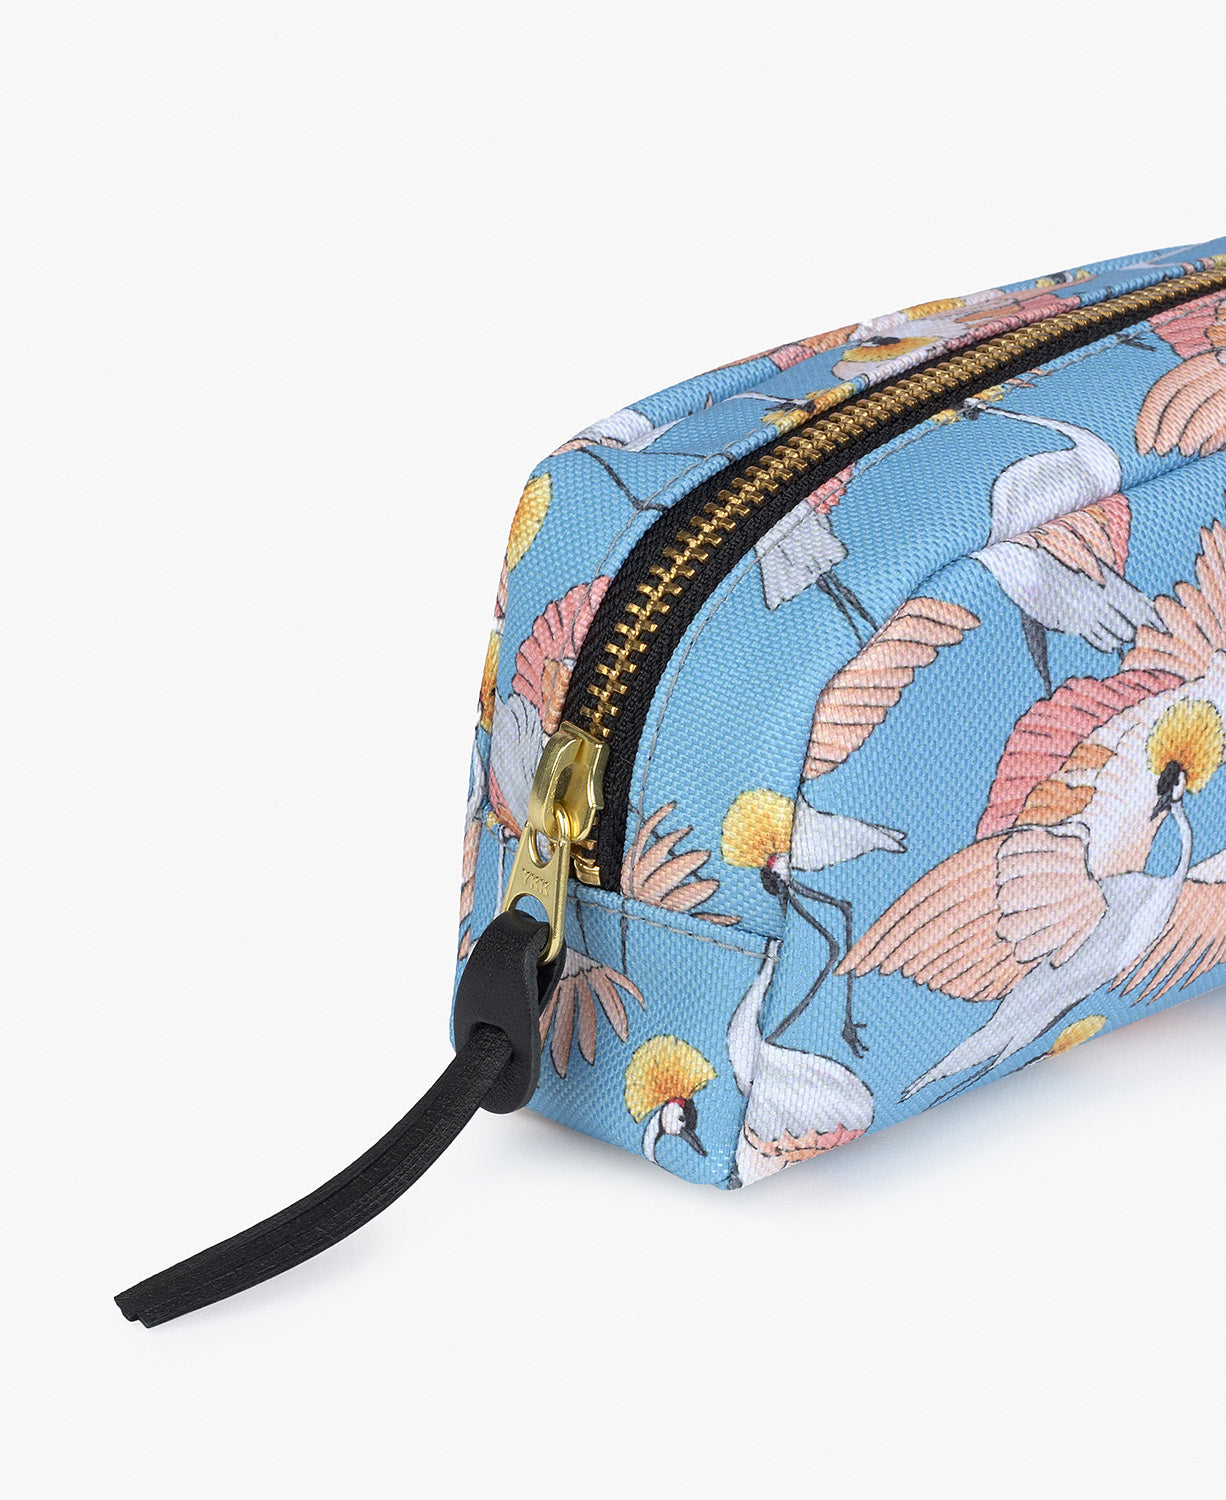 Small Make-Up Pouch - Imperial Heron